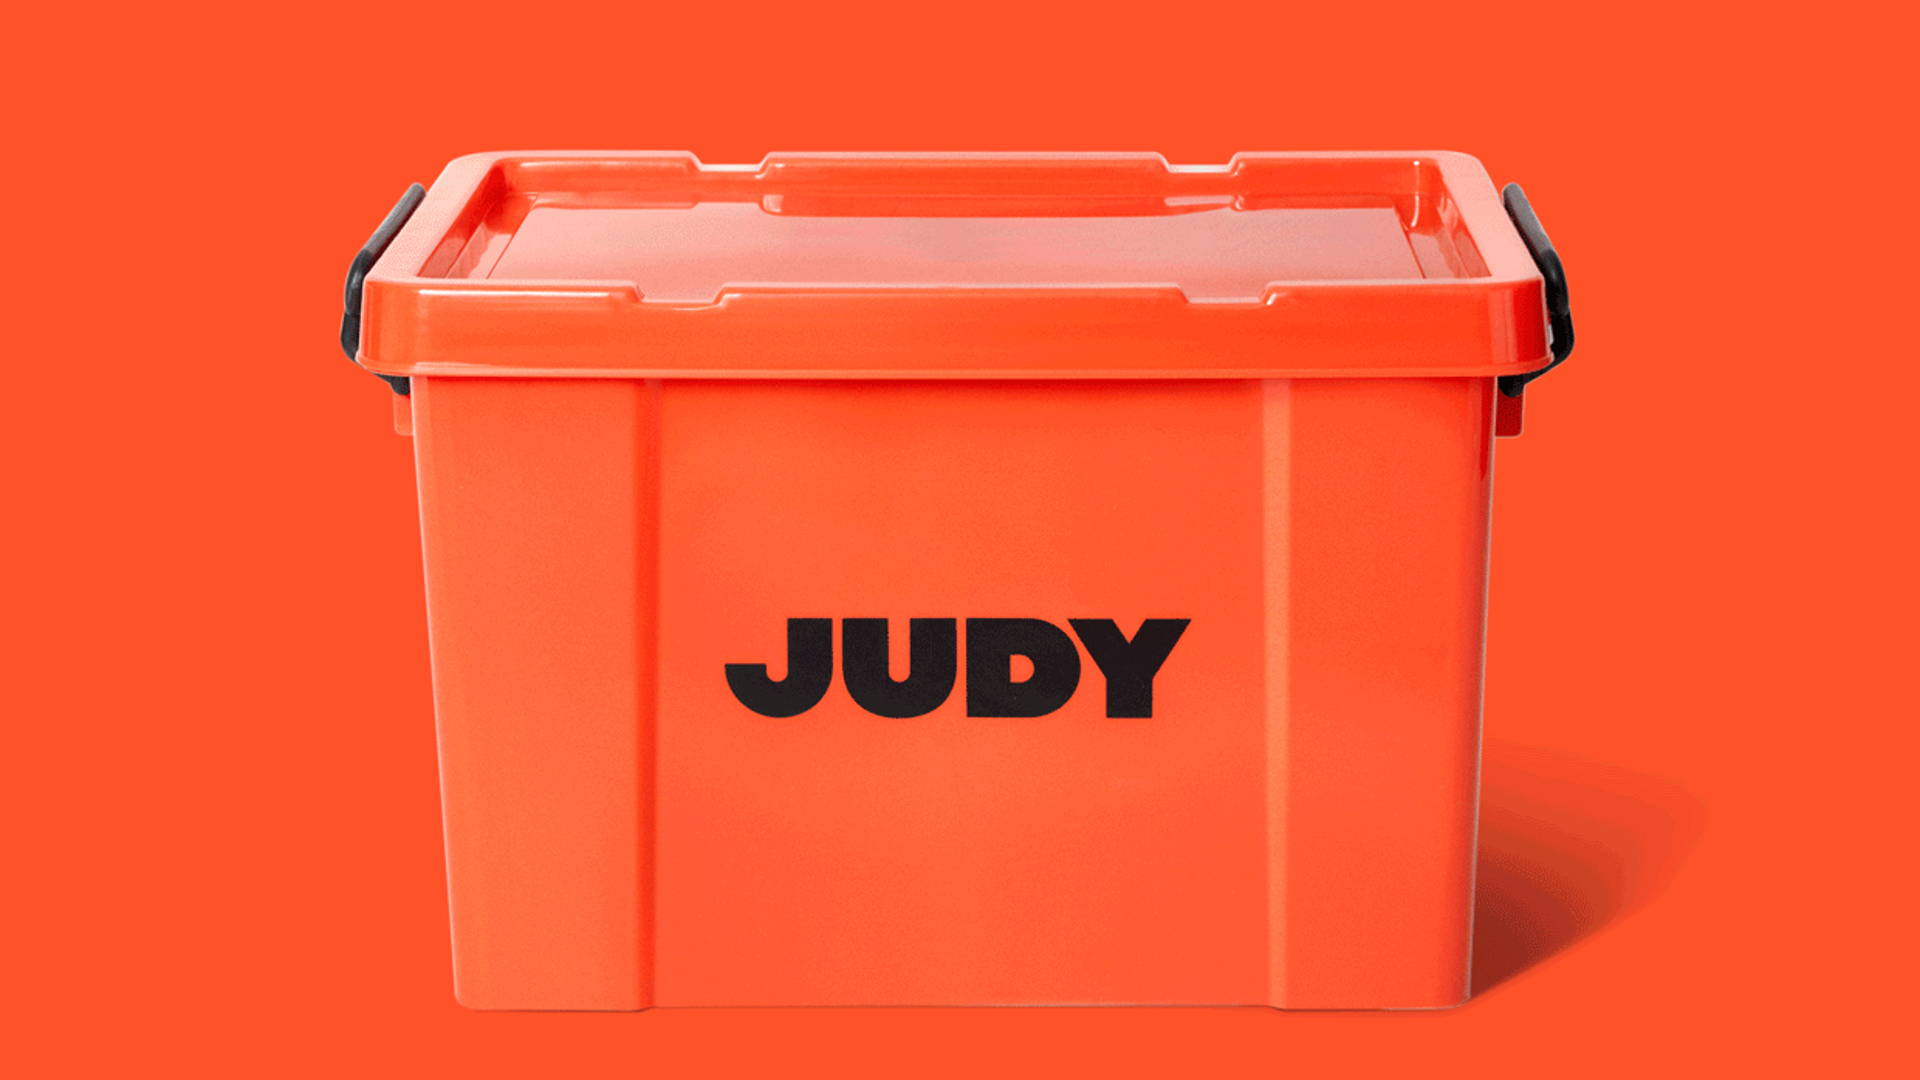 Featured image for Judy Emergency Kits Provide Functionality And Reassurance Without The Scariness